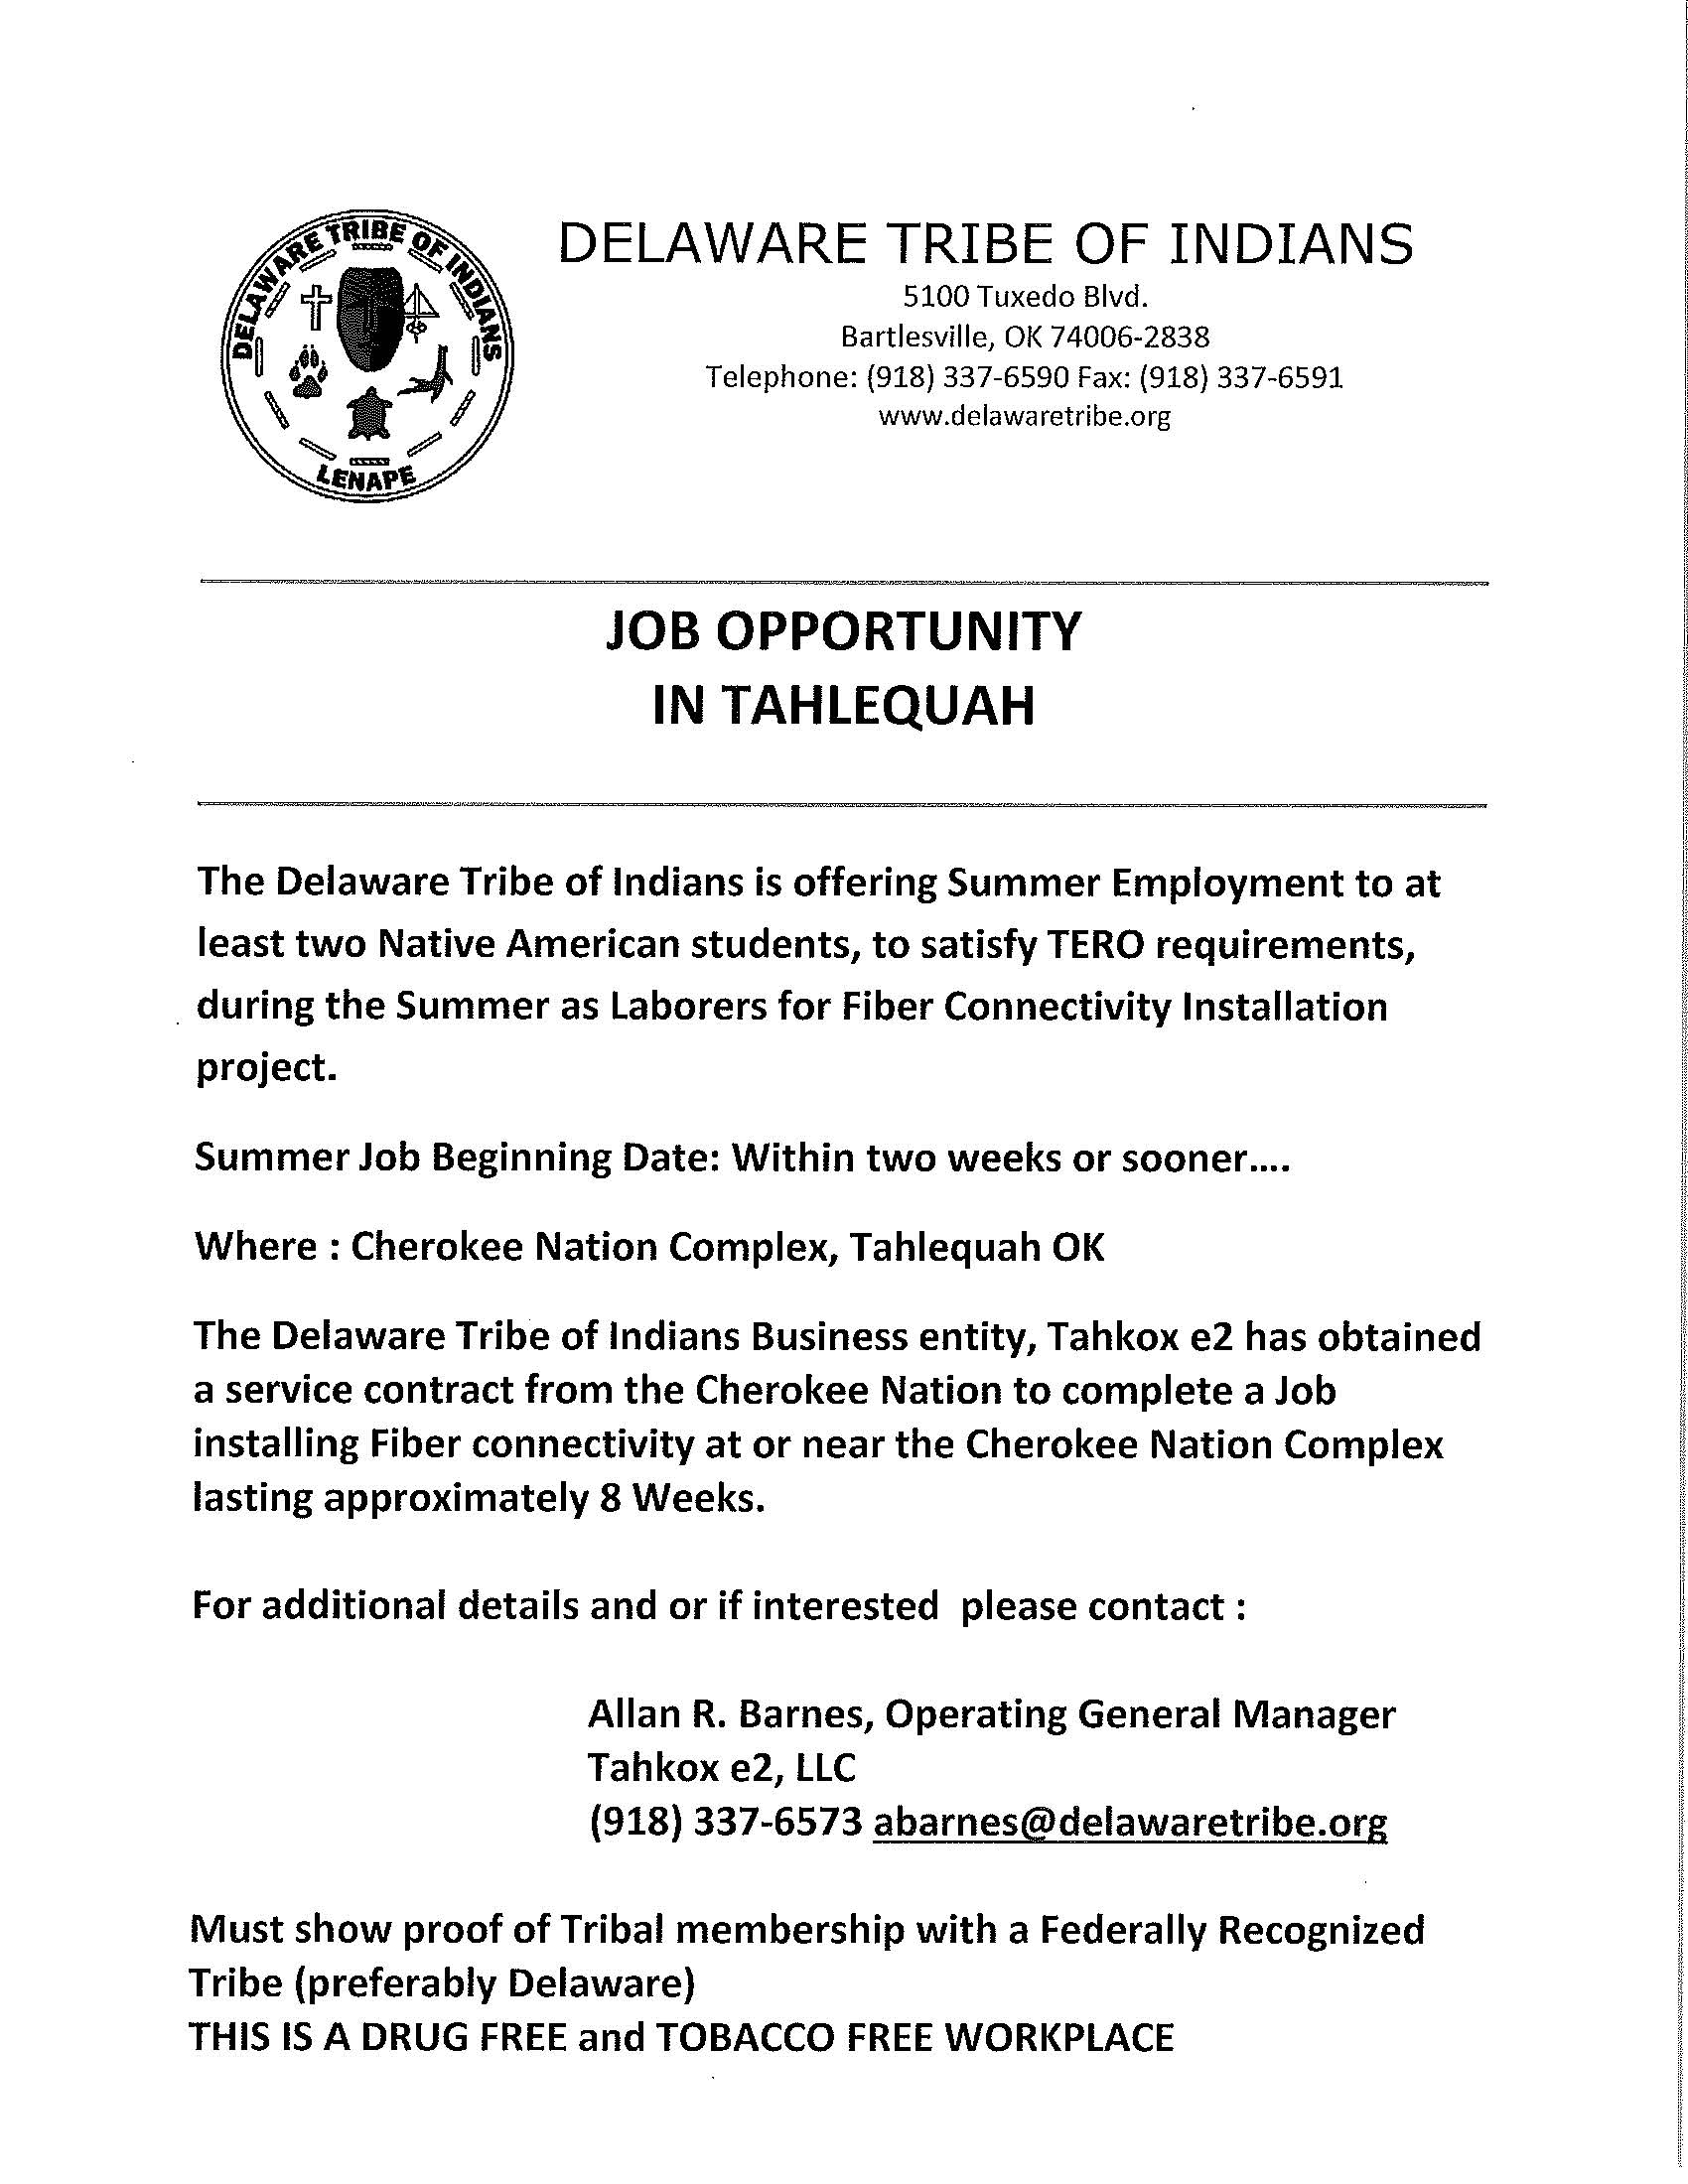 Job Opportunity in Talequah